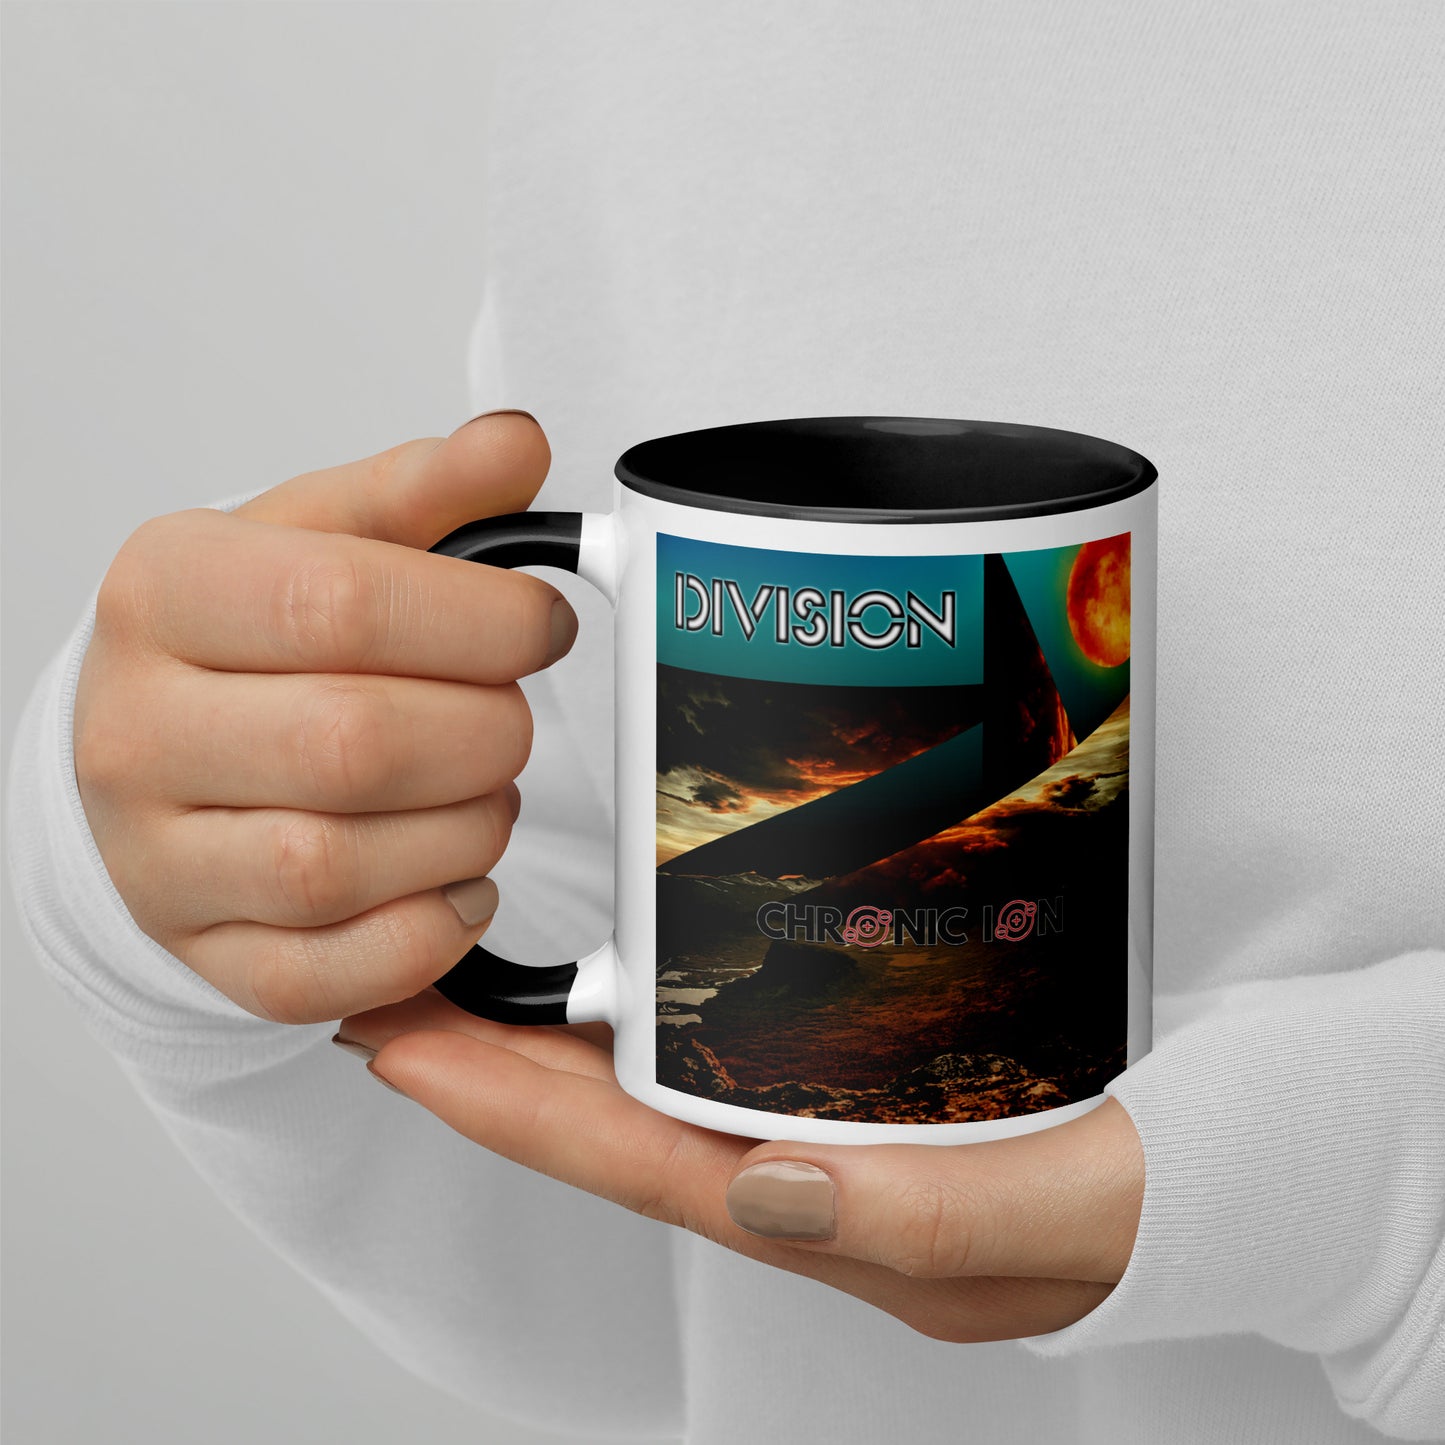 Chronic Ion - Division Mug With Color Inside